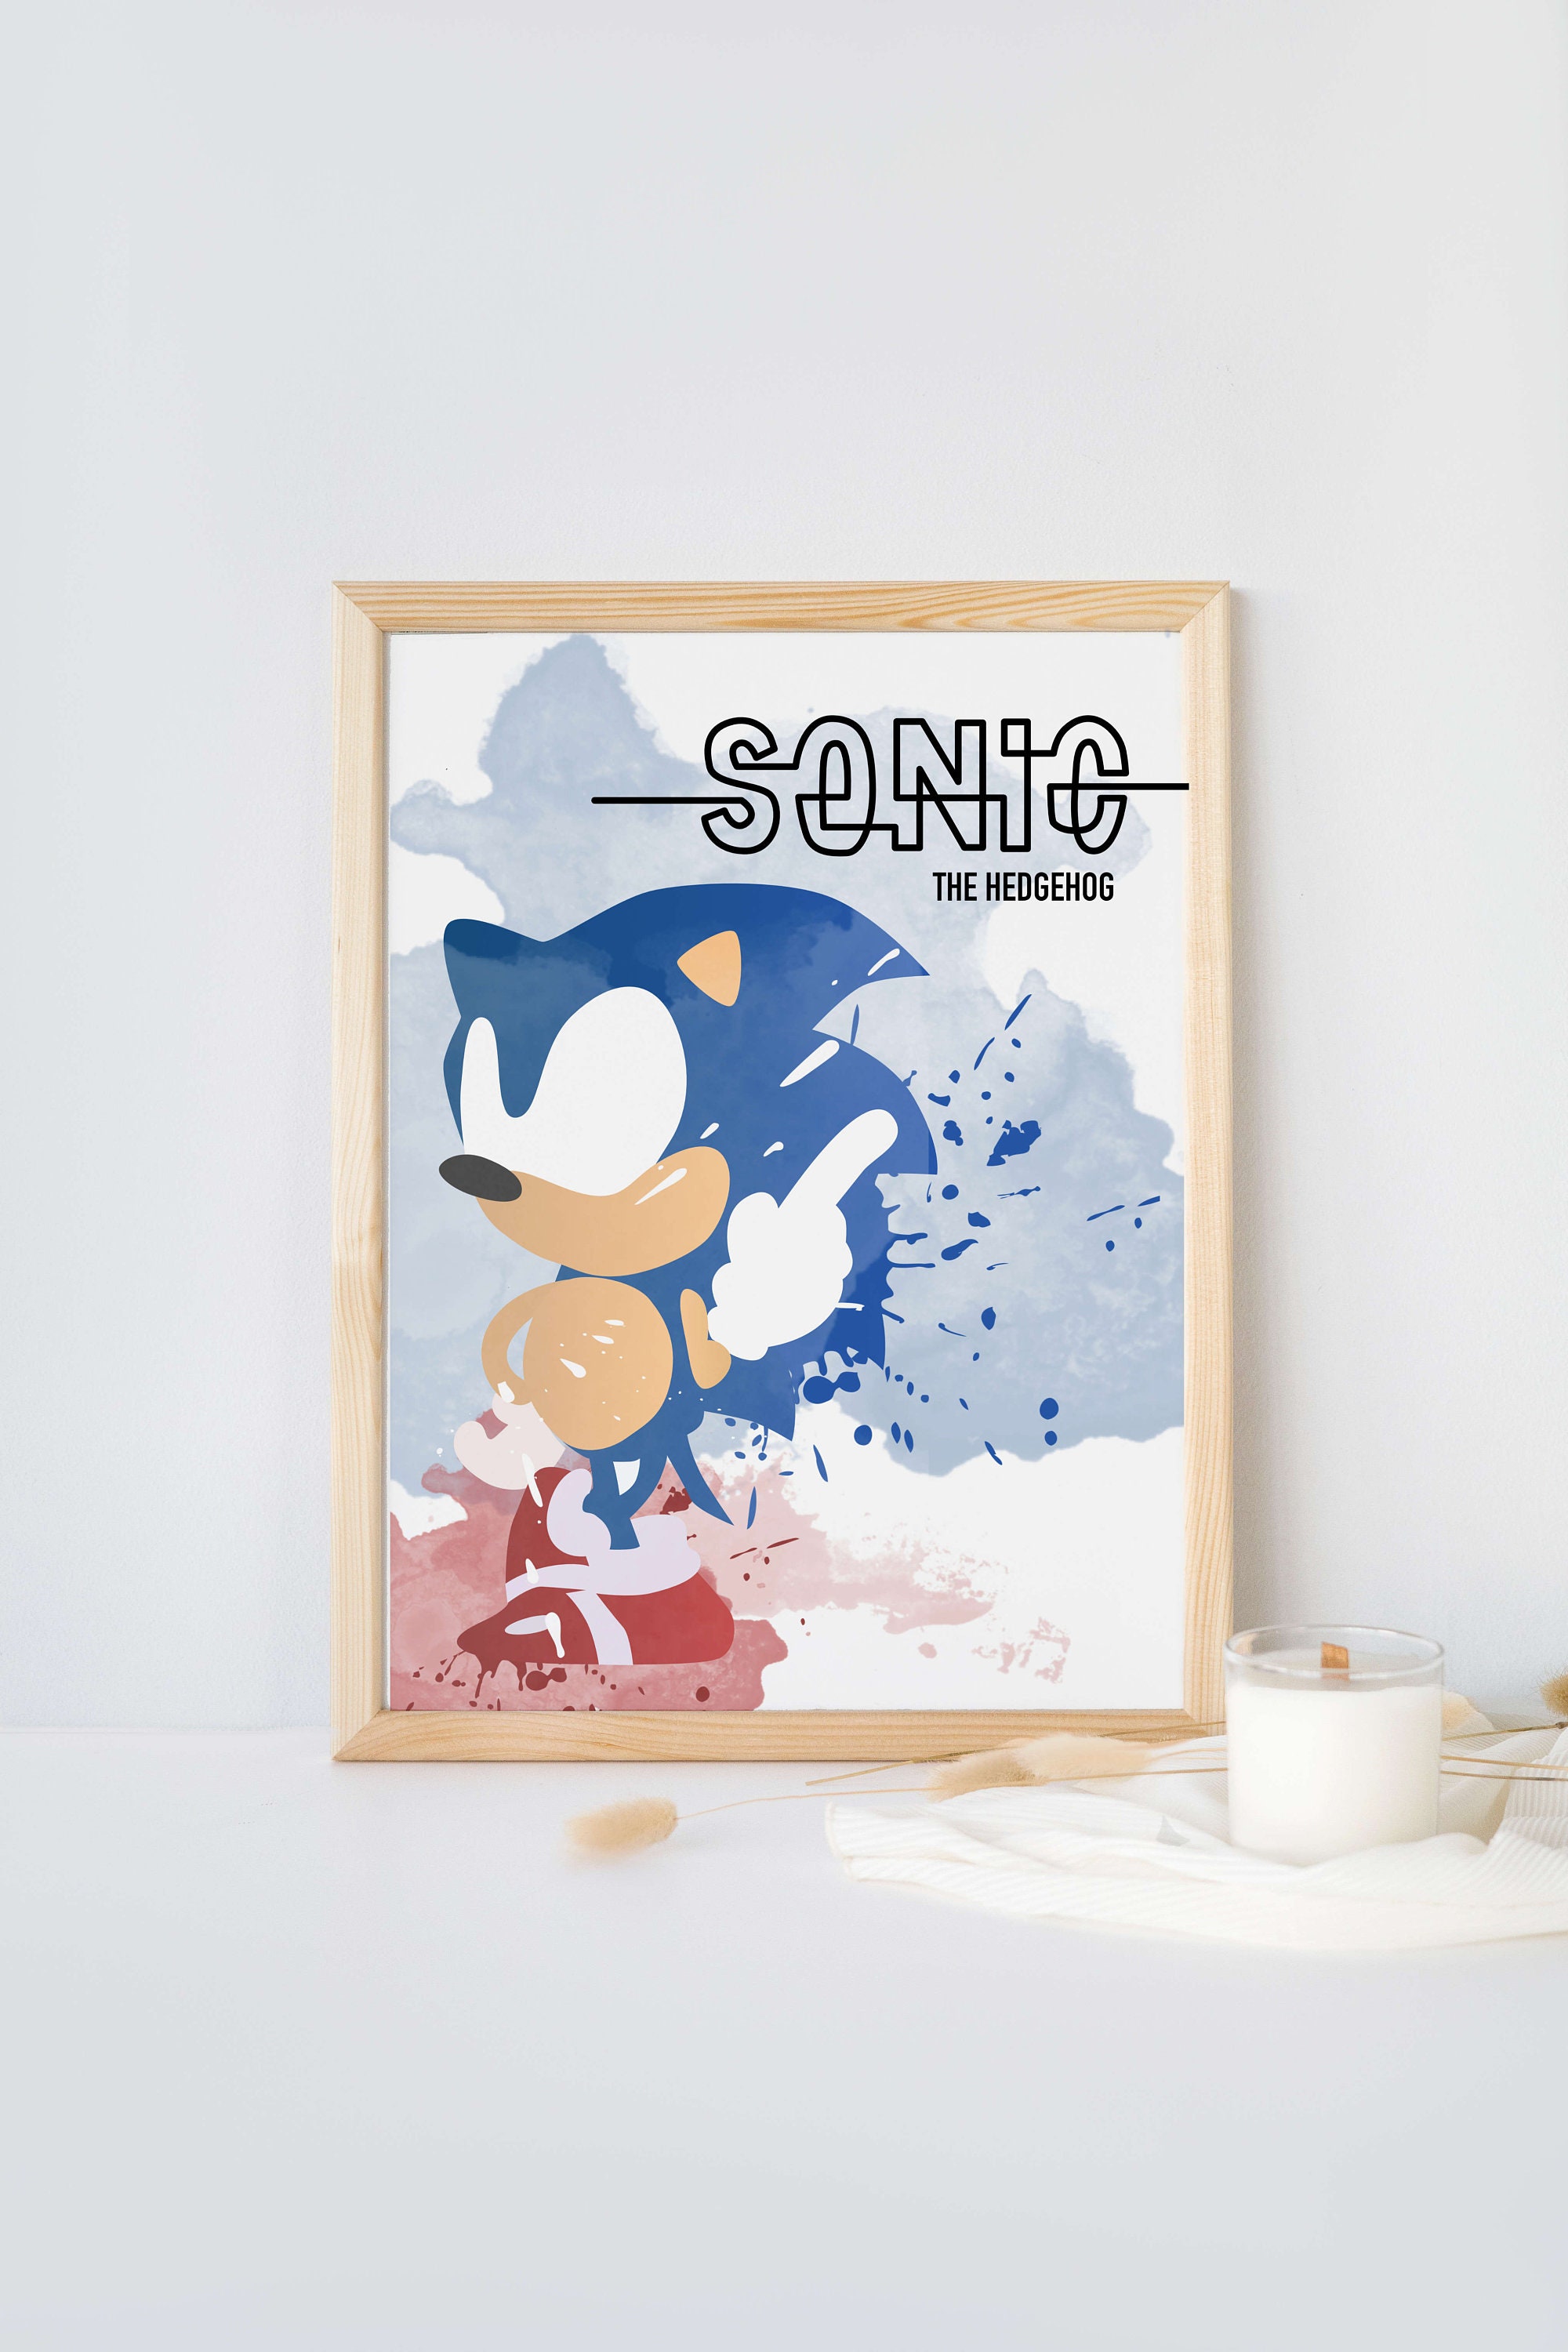 Sonic The Hedgehog 3 poster by me! What do you guys think? : r/SonicTheMovie